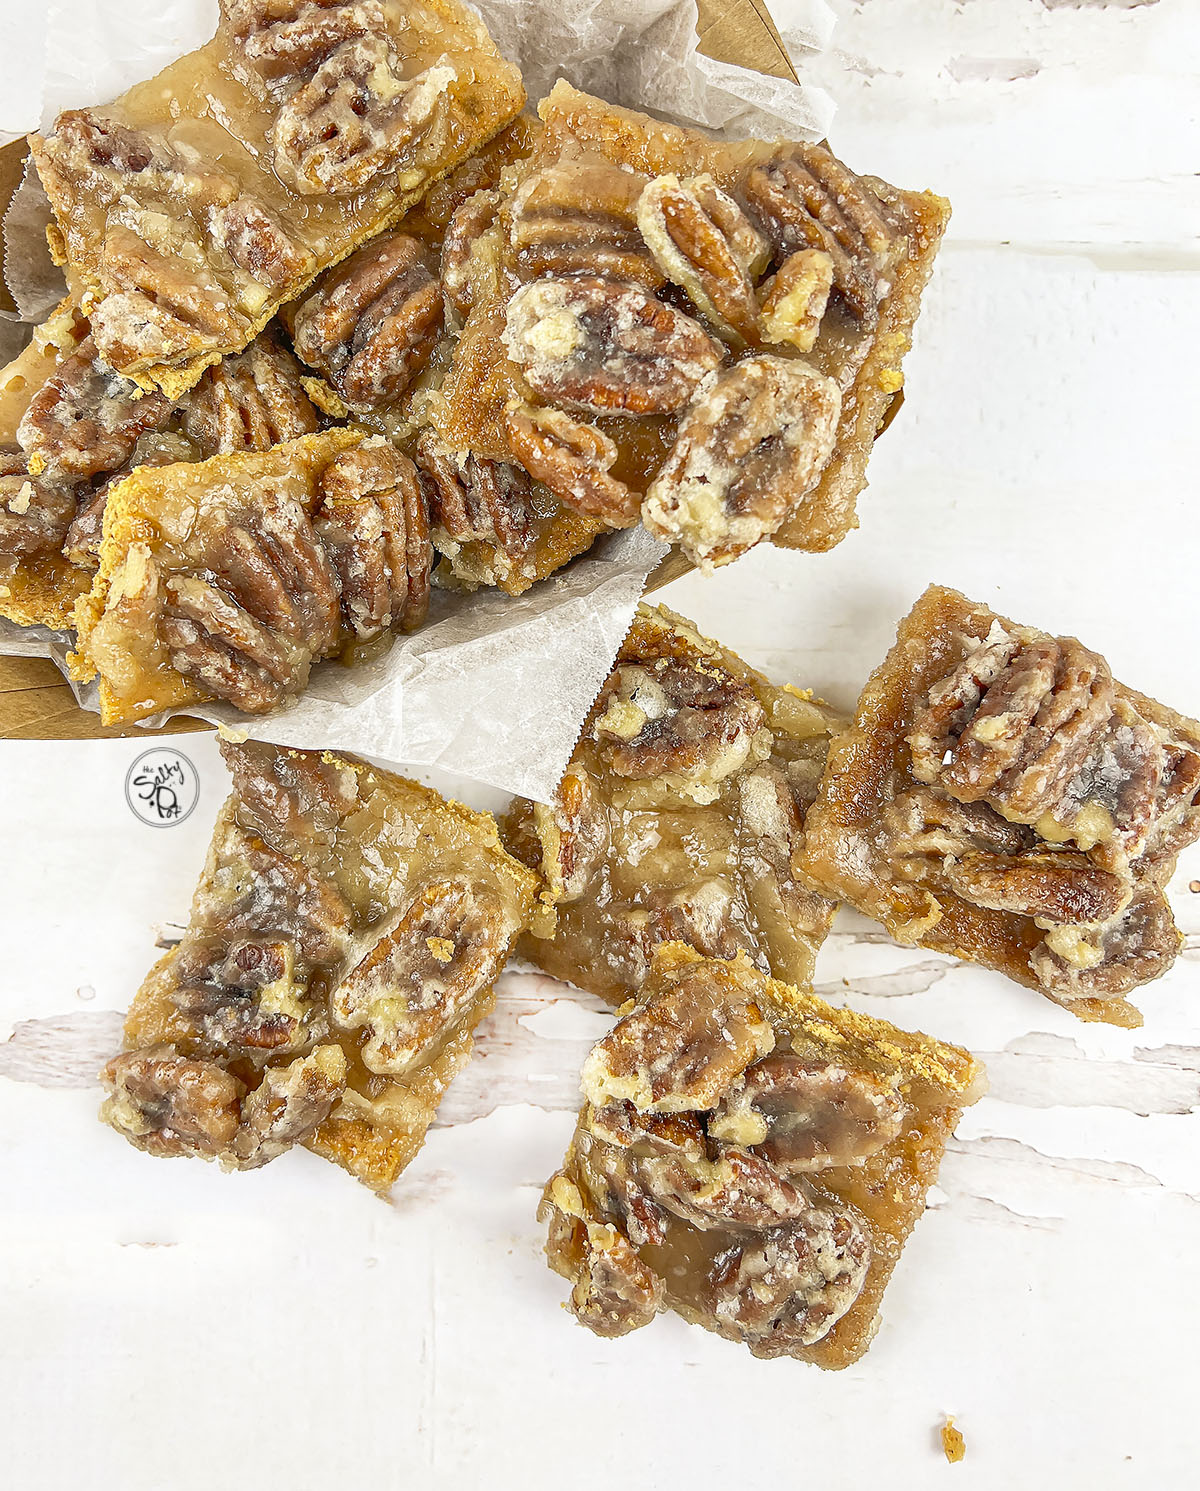 Pecan pie bark in a cardboard container on the upper right with four pieces on the table in front of it.